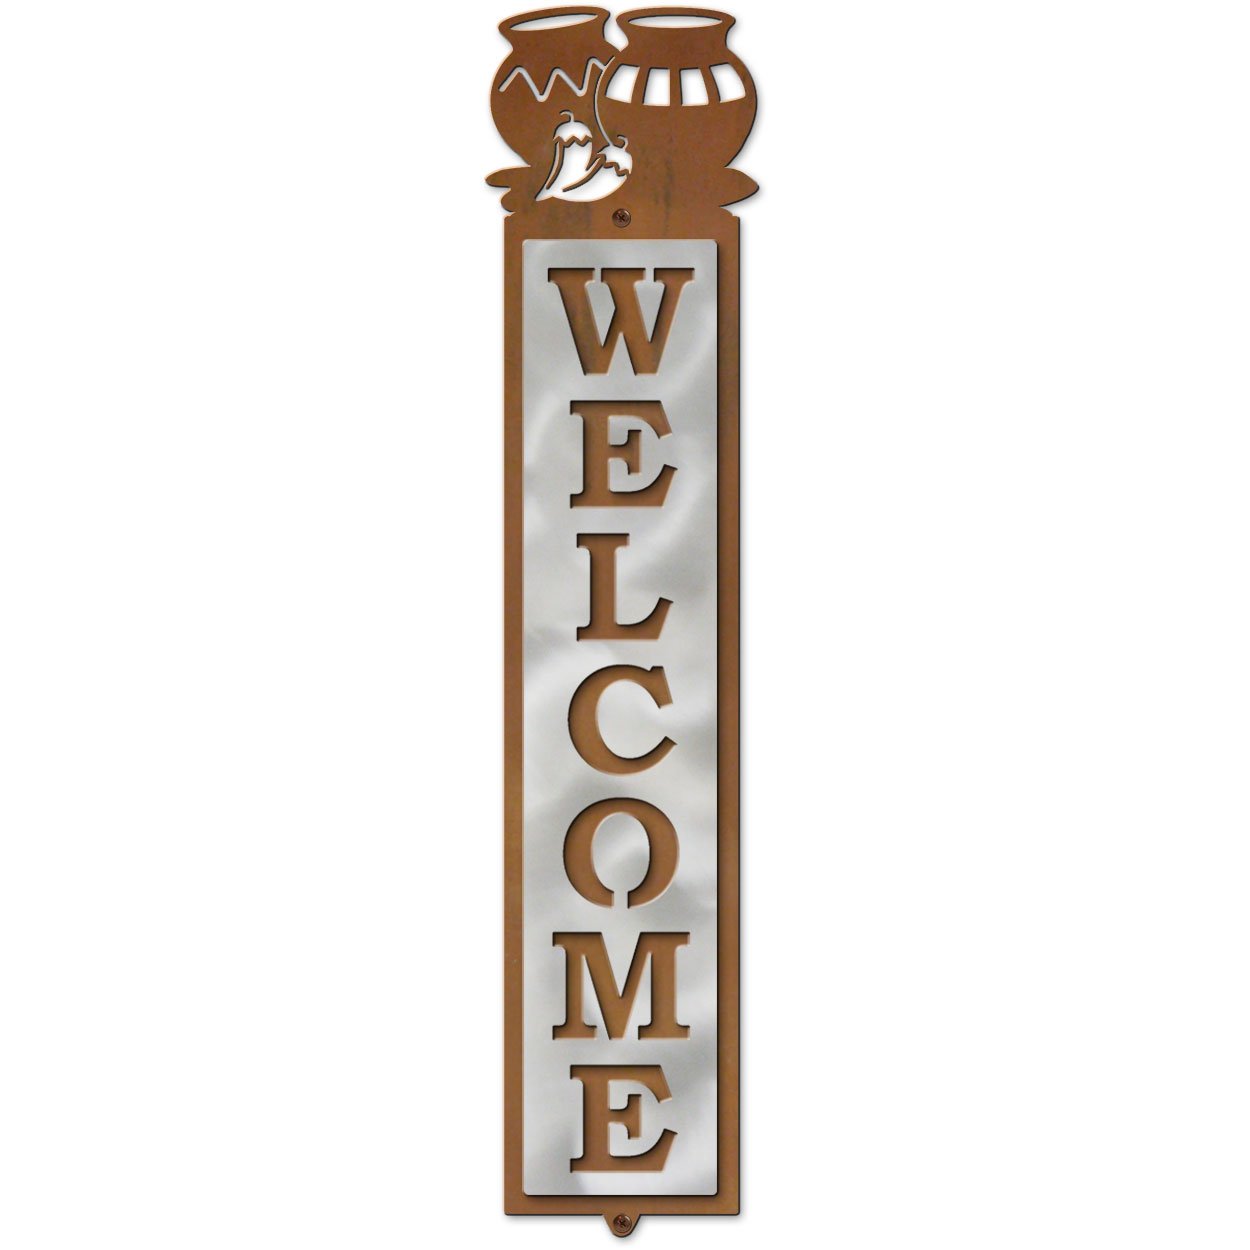 605068 - Chili Pots Metal Art Vertical Welcome Sign